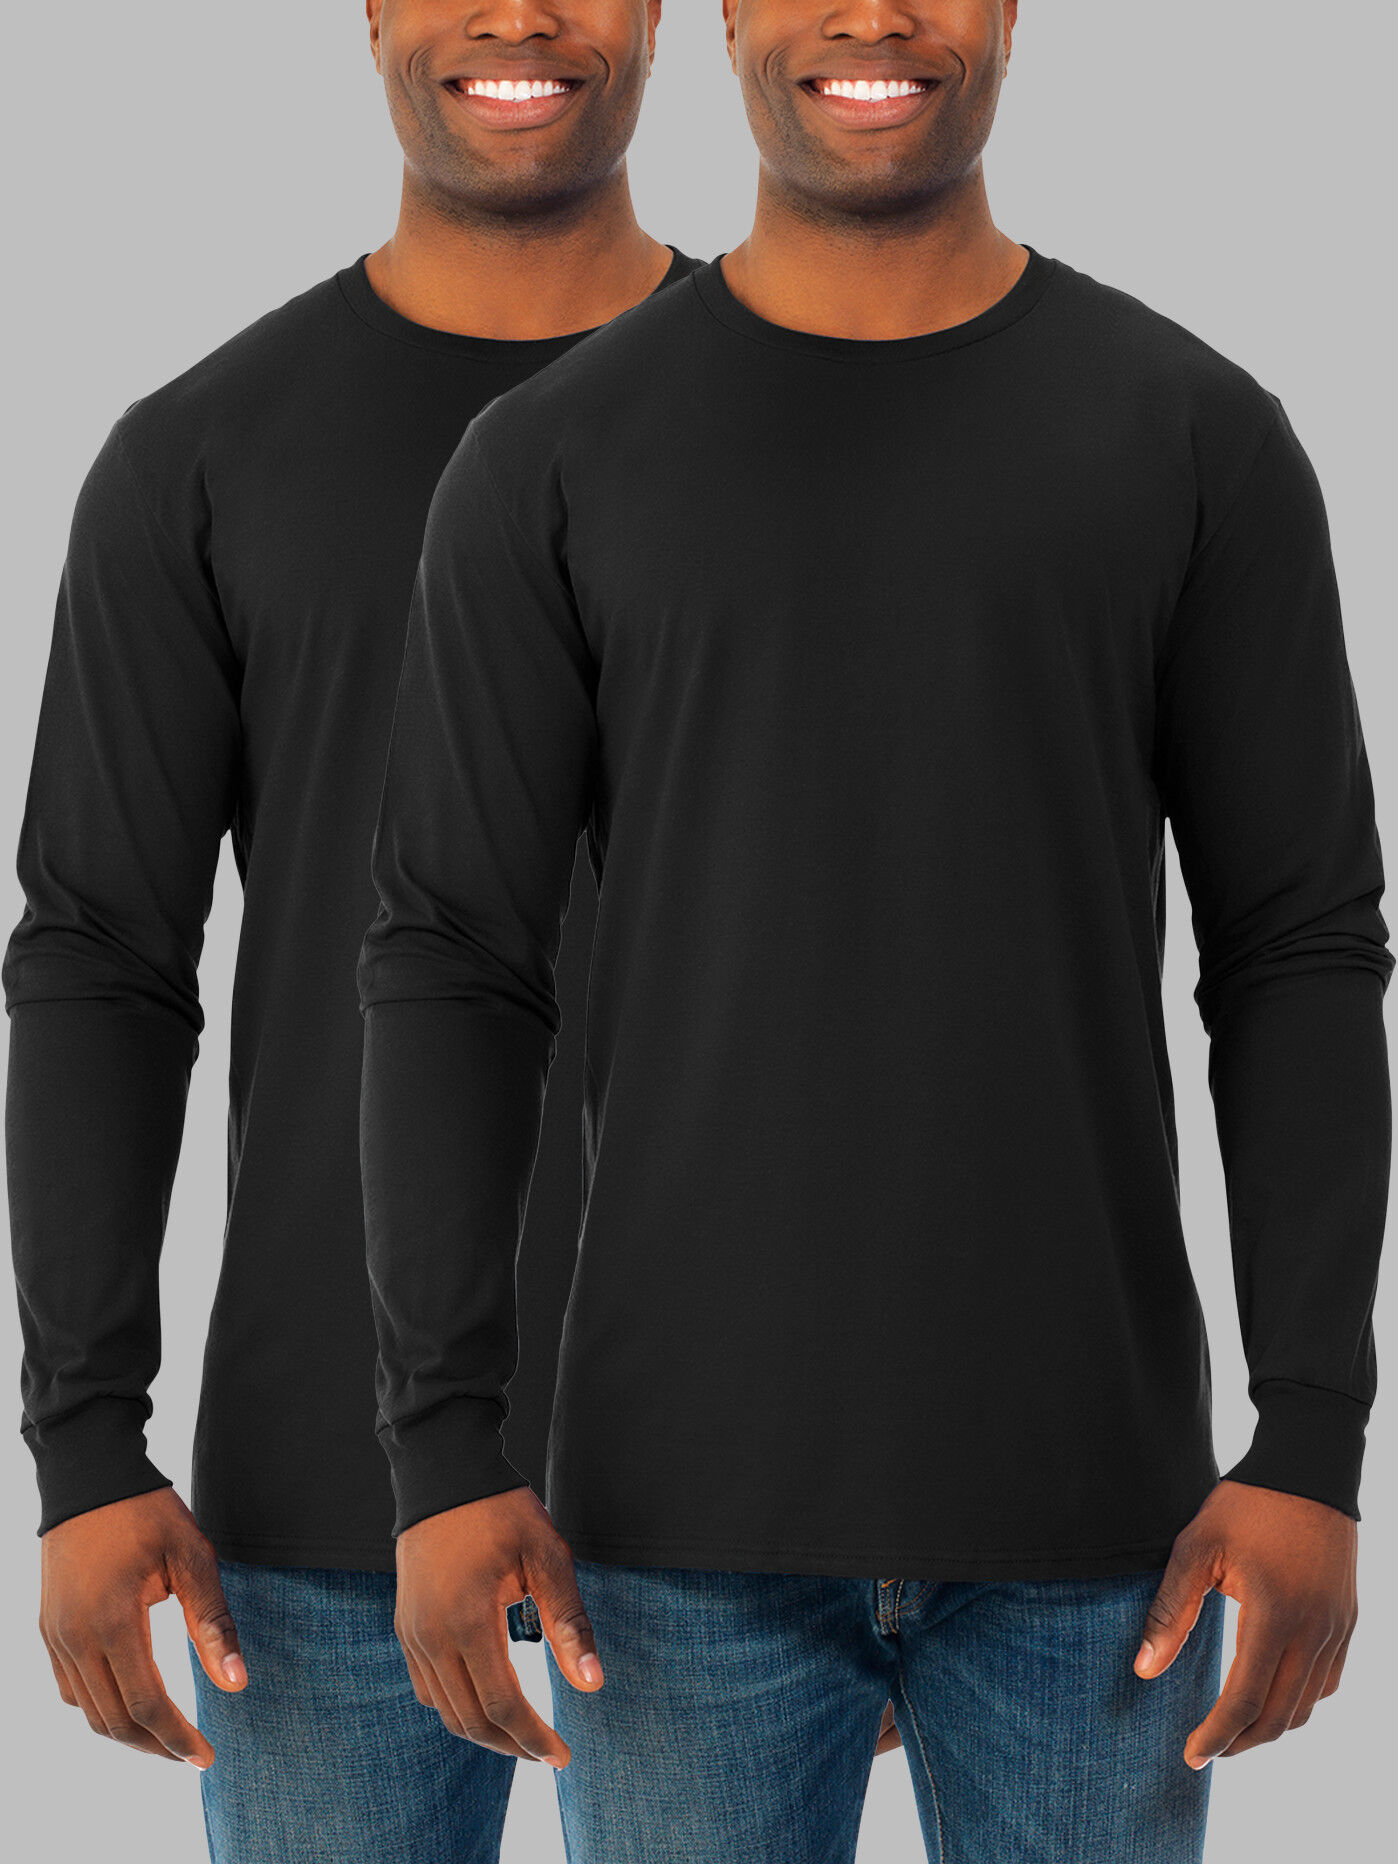 Soft Long Sleeve Crew Neck T-Shirt | Fruit of the Loom